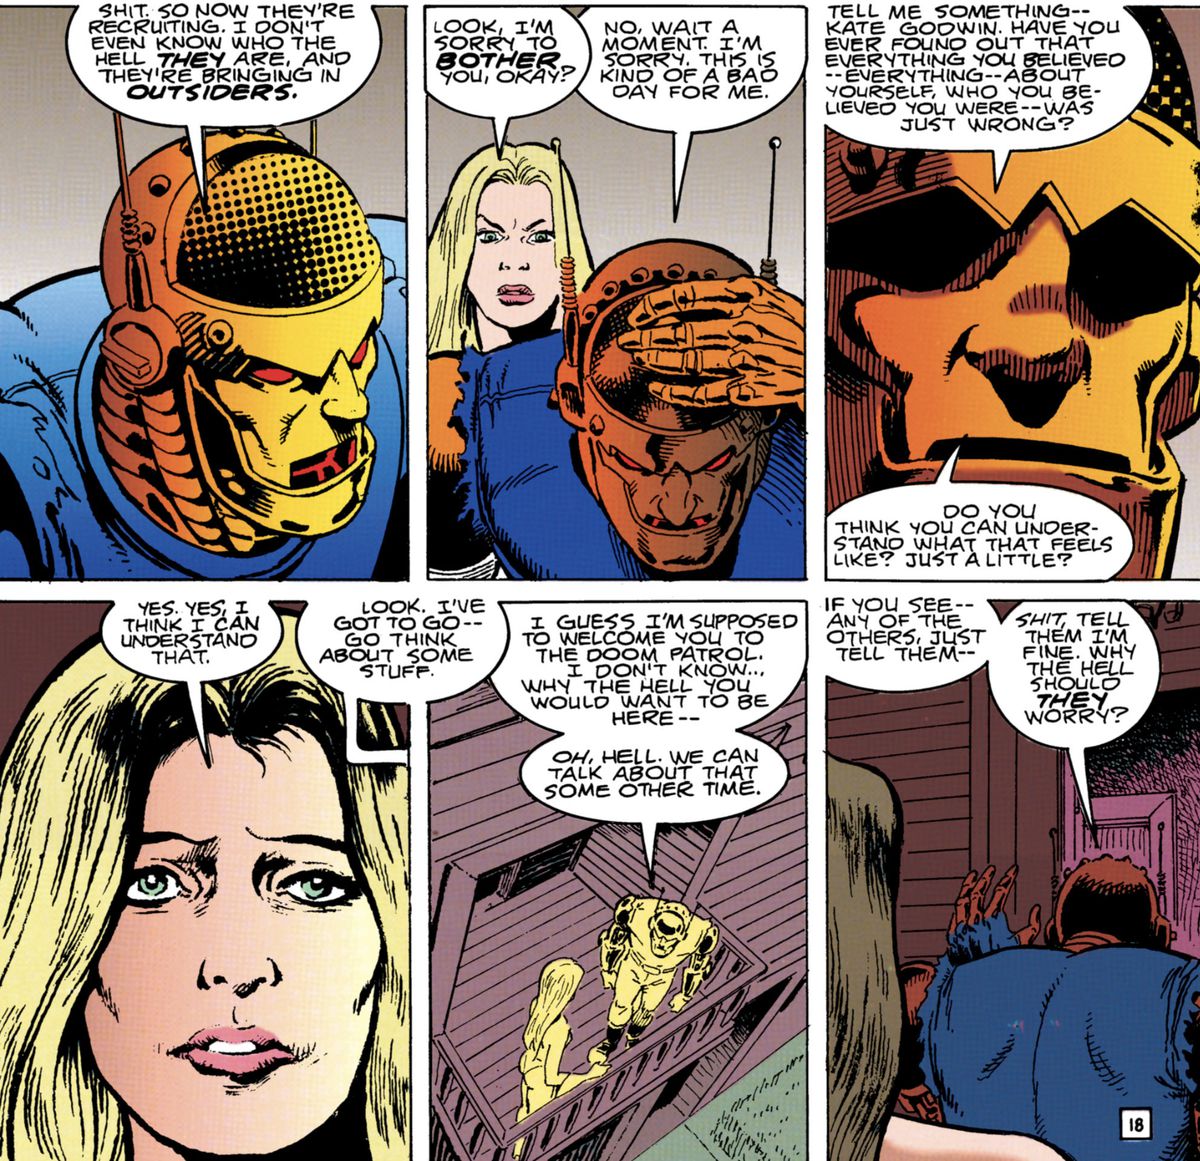 Robotman rebuffs Kate Godwin at first for being an outsider to the team, but as they talk he apologizes. He asks “Have you ever found out that everything you believed [...] about yourself [...] was just wrong?” With an understanding expression, she replies “Yes. Yes, I think I can understand that,” in Doom Patrol #71 (1993). 